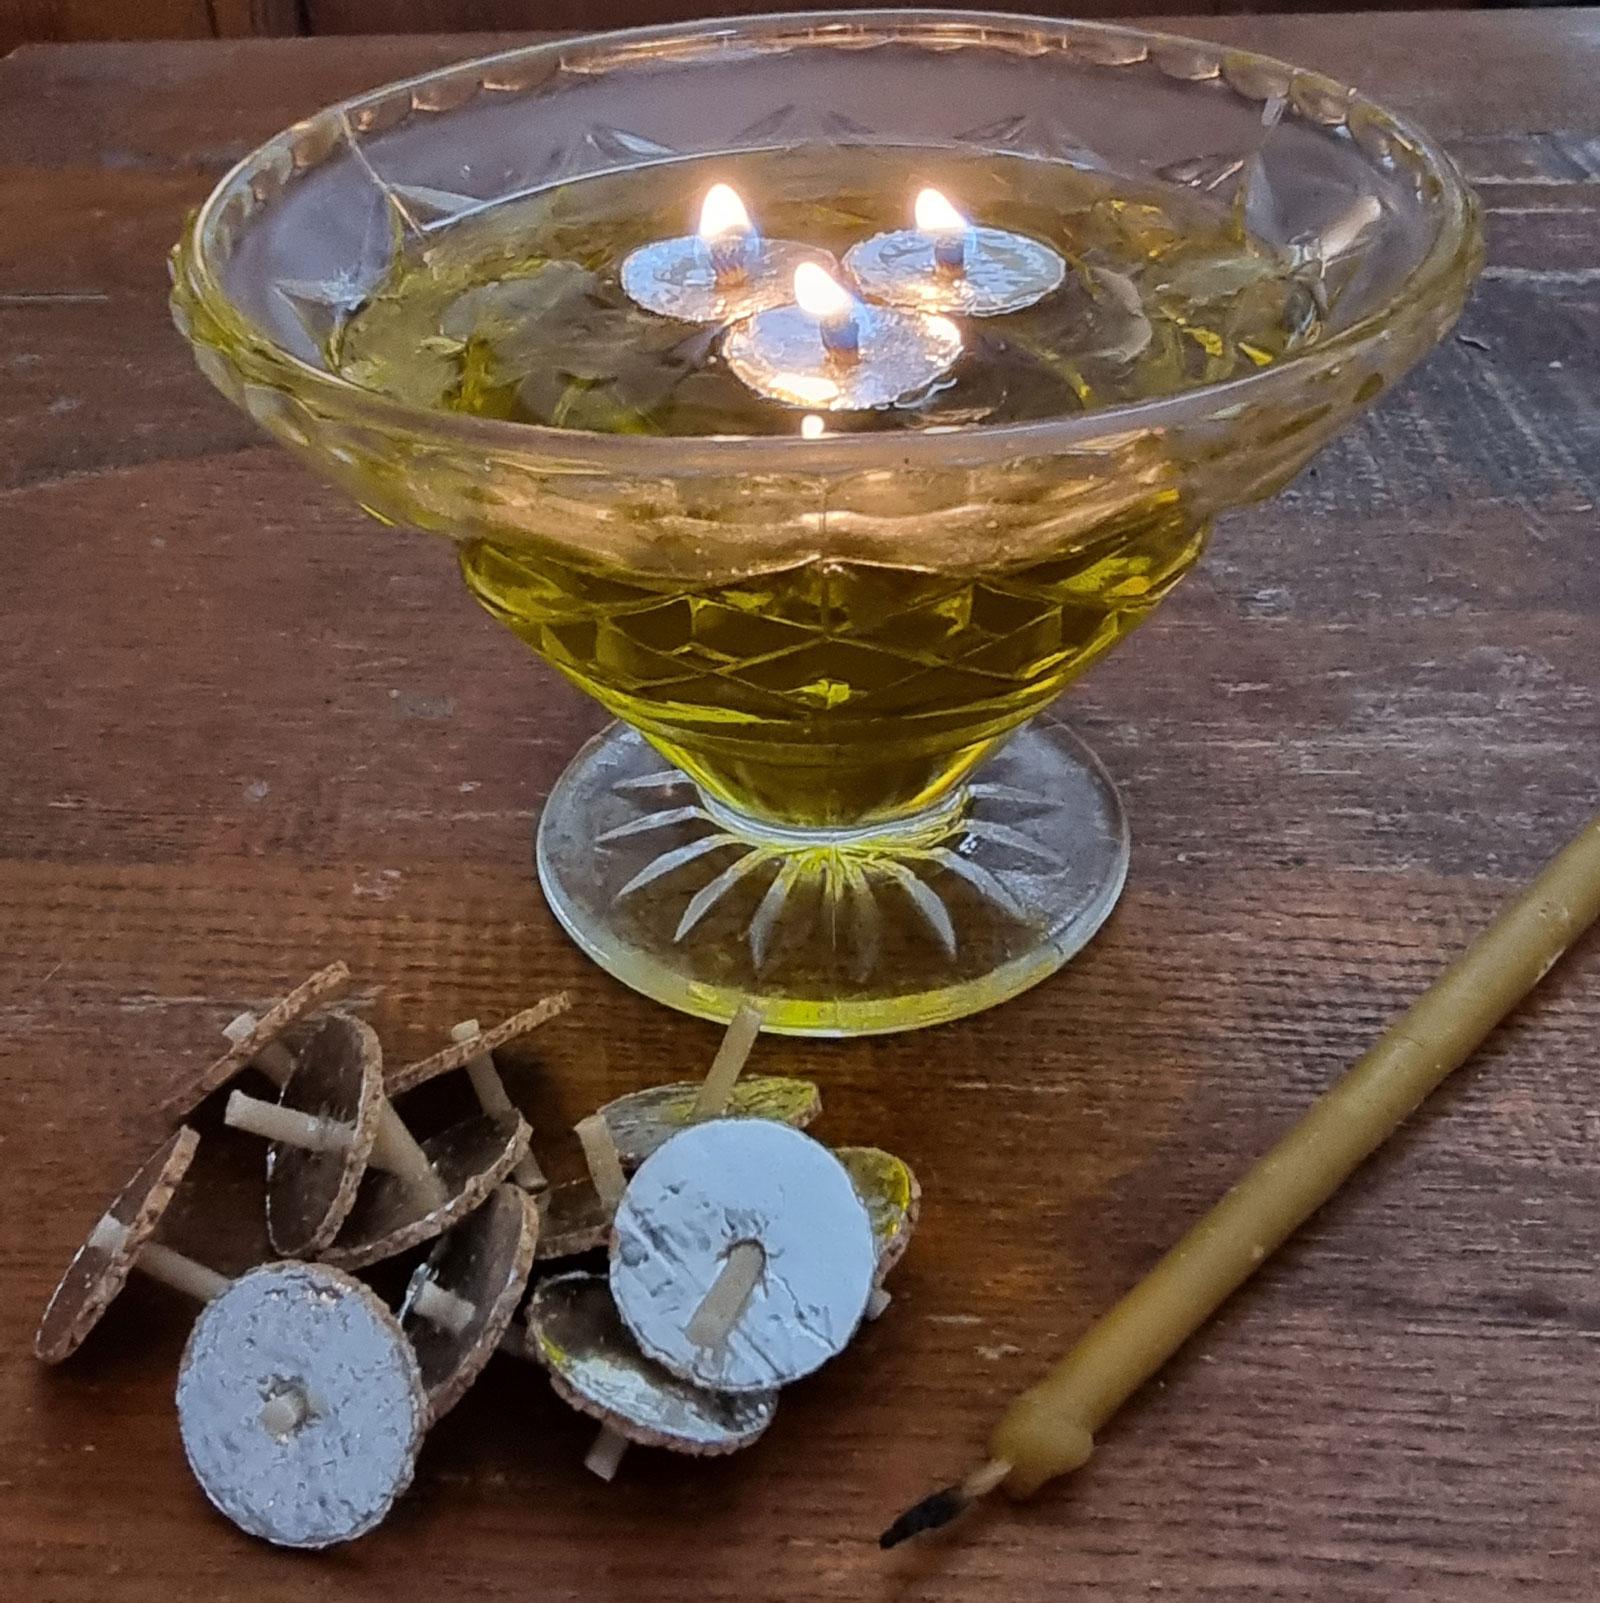 Candle Wicks From Beeswax for Floating Candles Cooking Oil Vigil